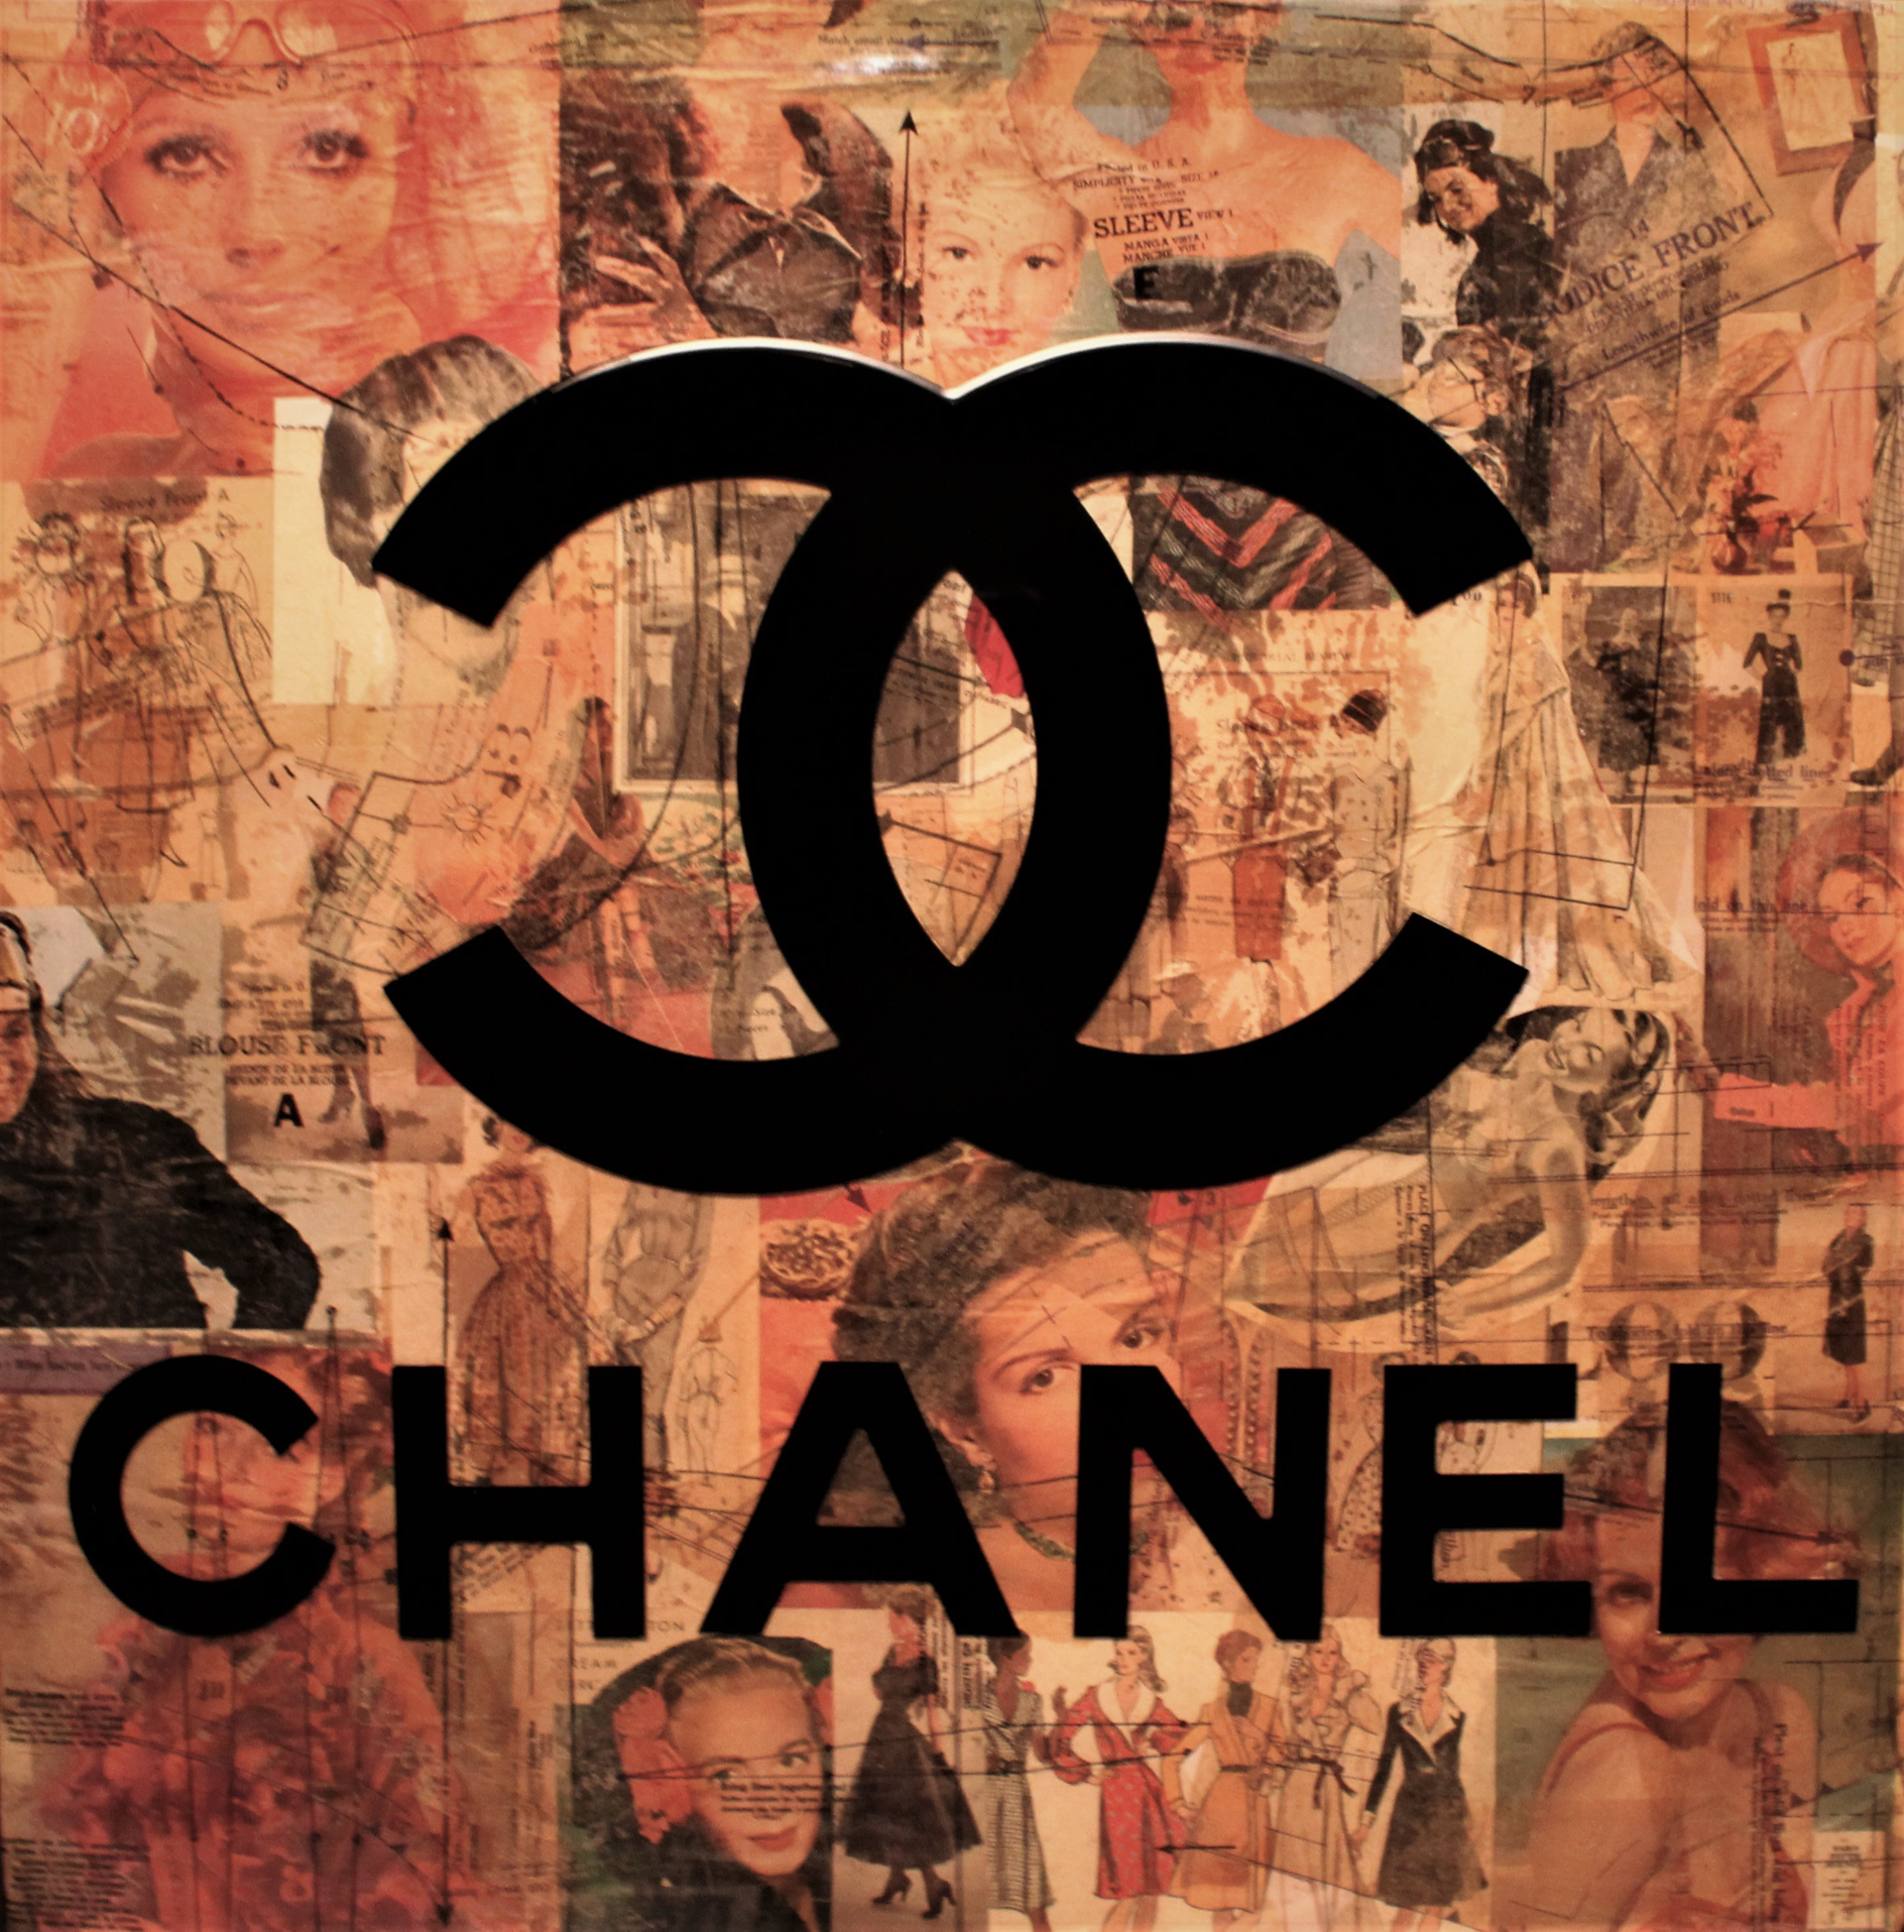 Chanel No. 3 by John Quigley